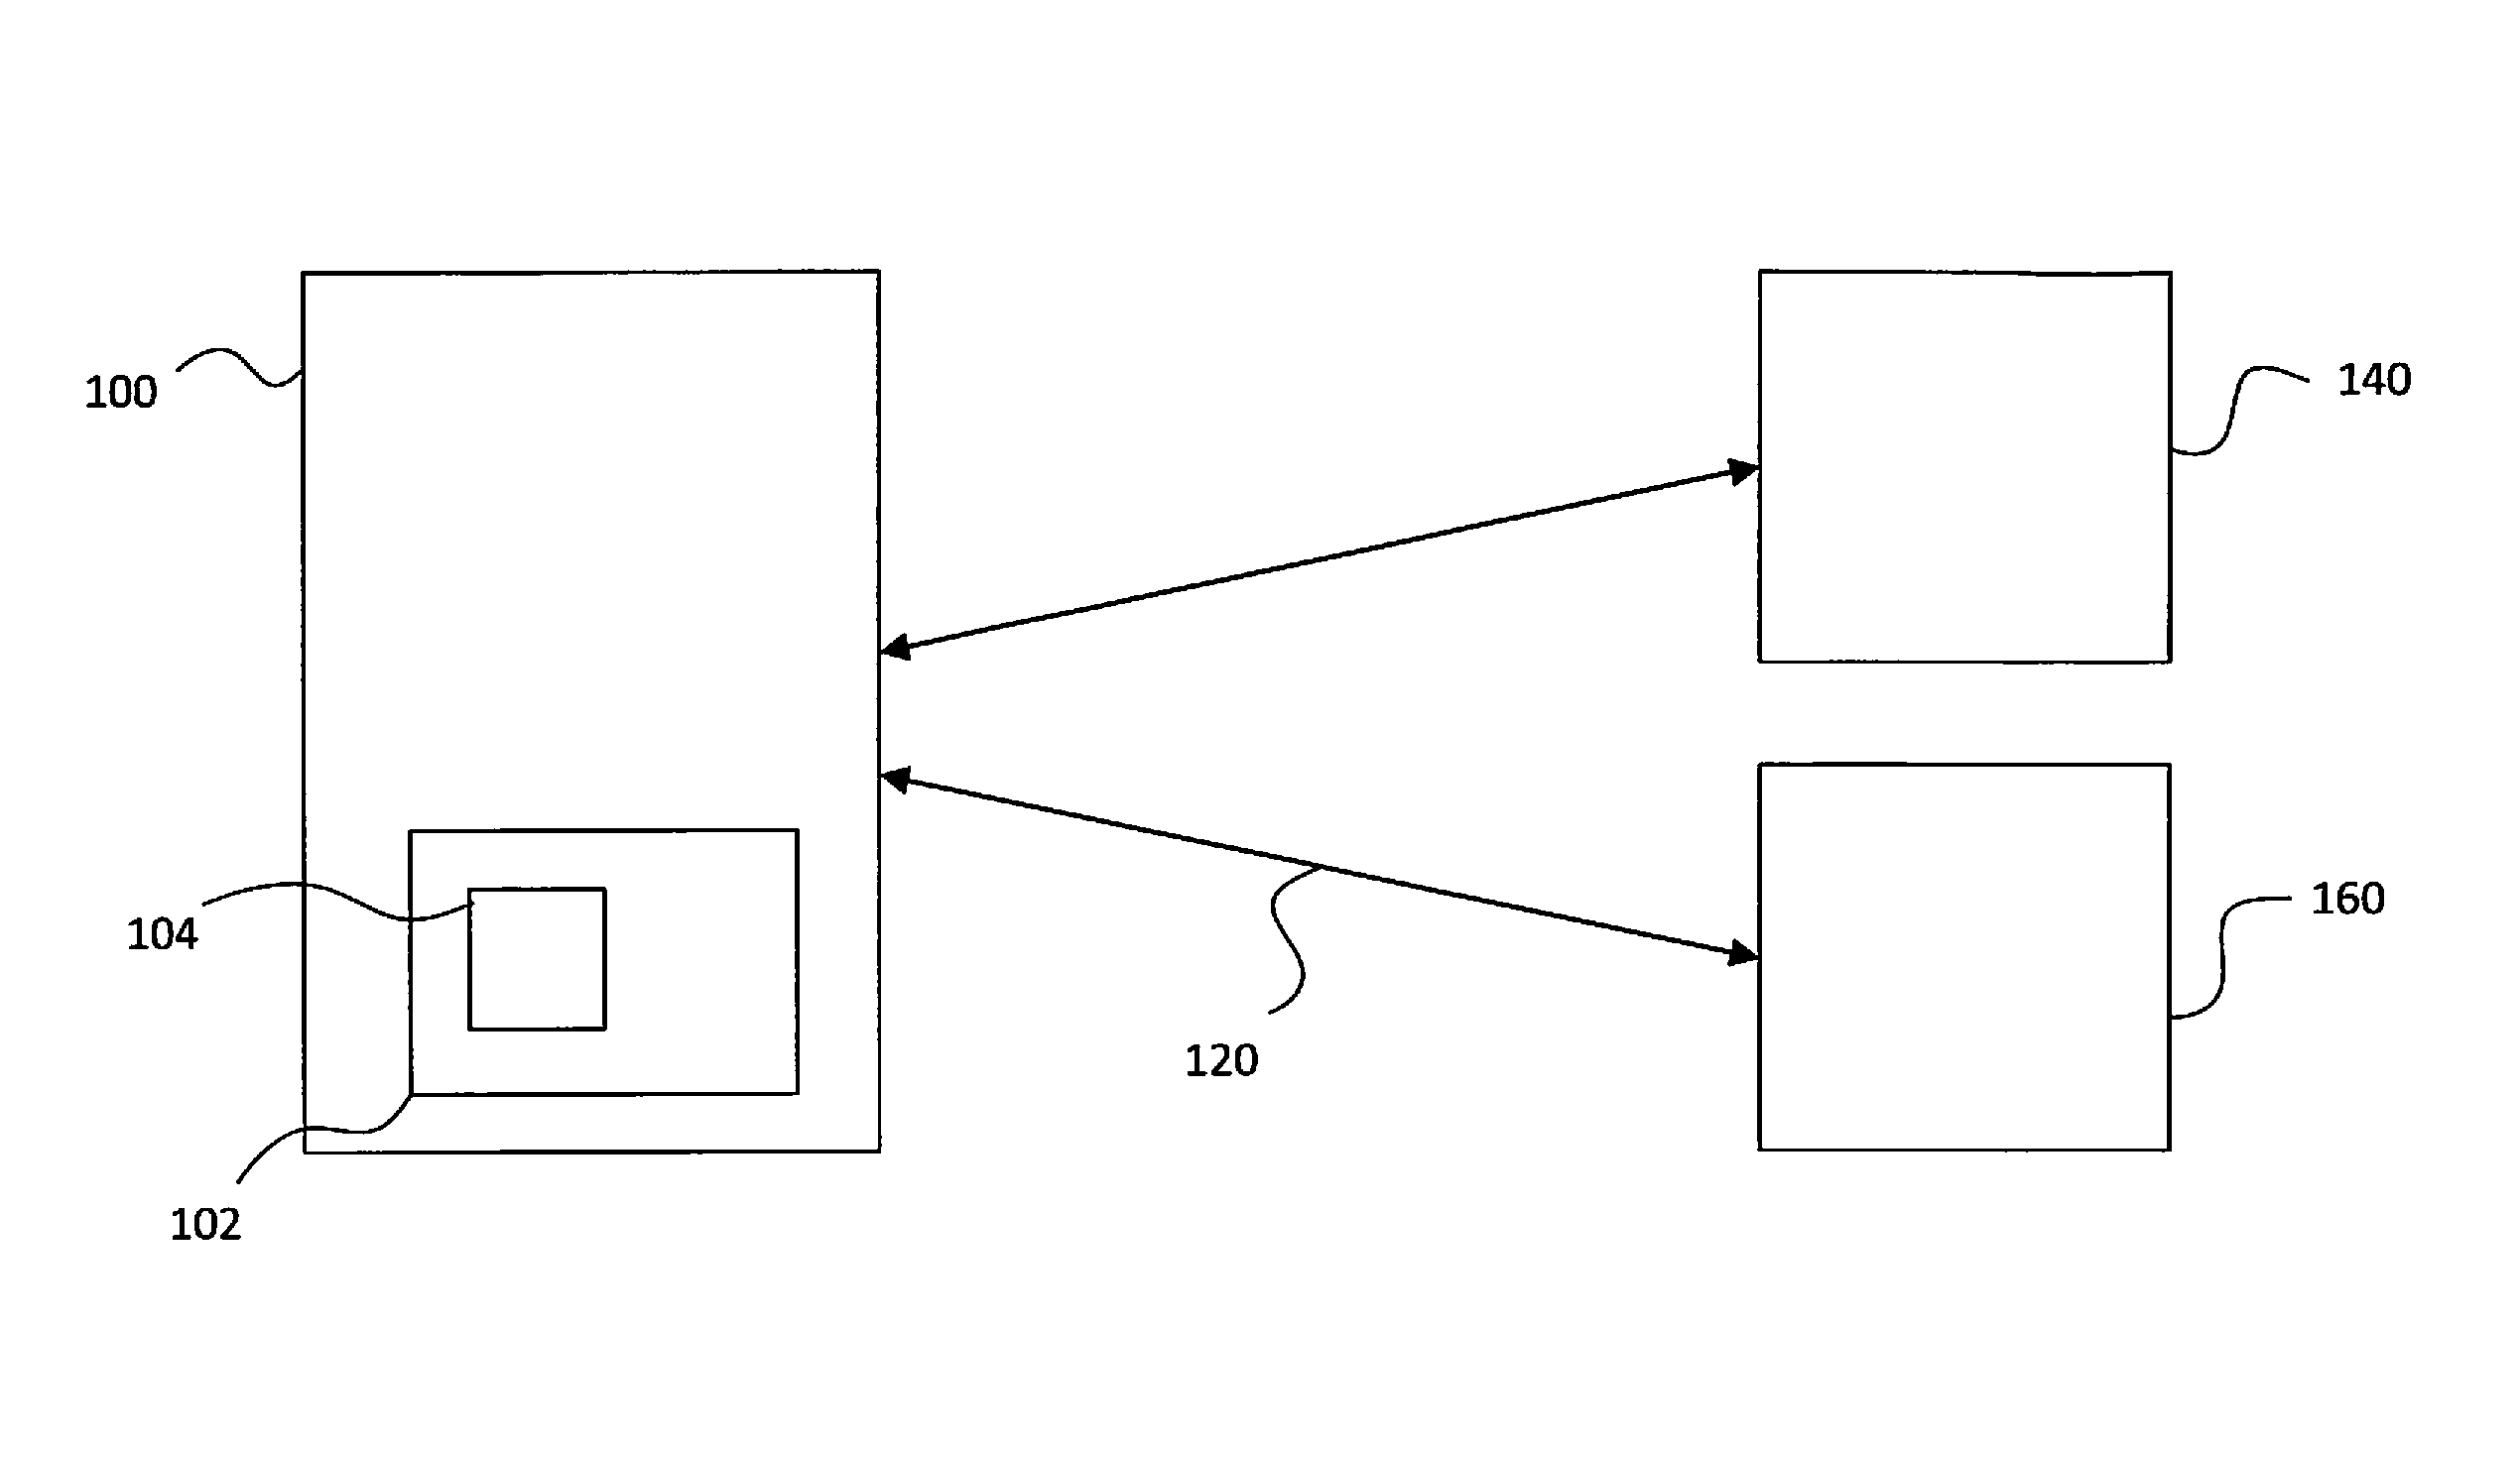 Method of securing a computing device